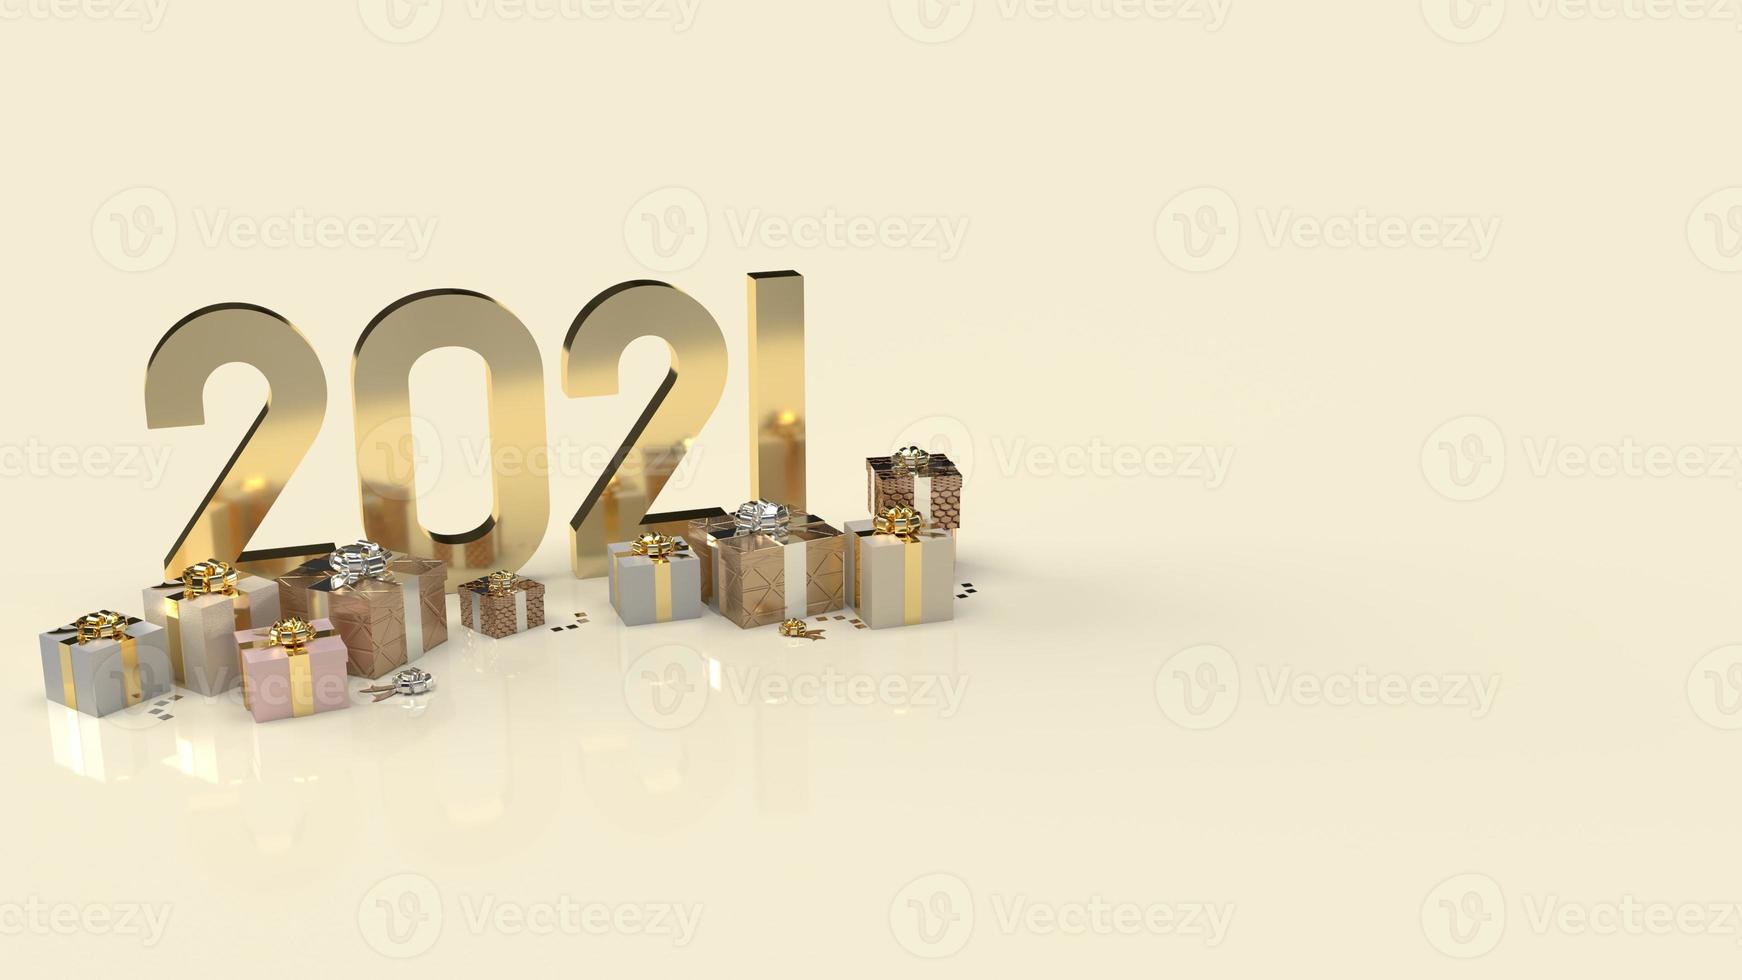 gold 2021 text and gift box for new year content 3d rendering. photo